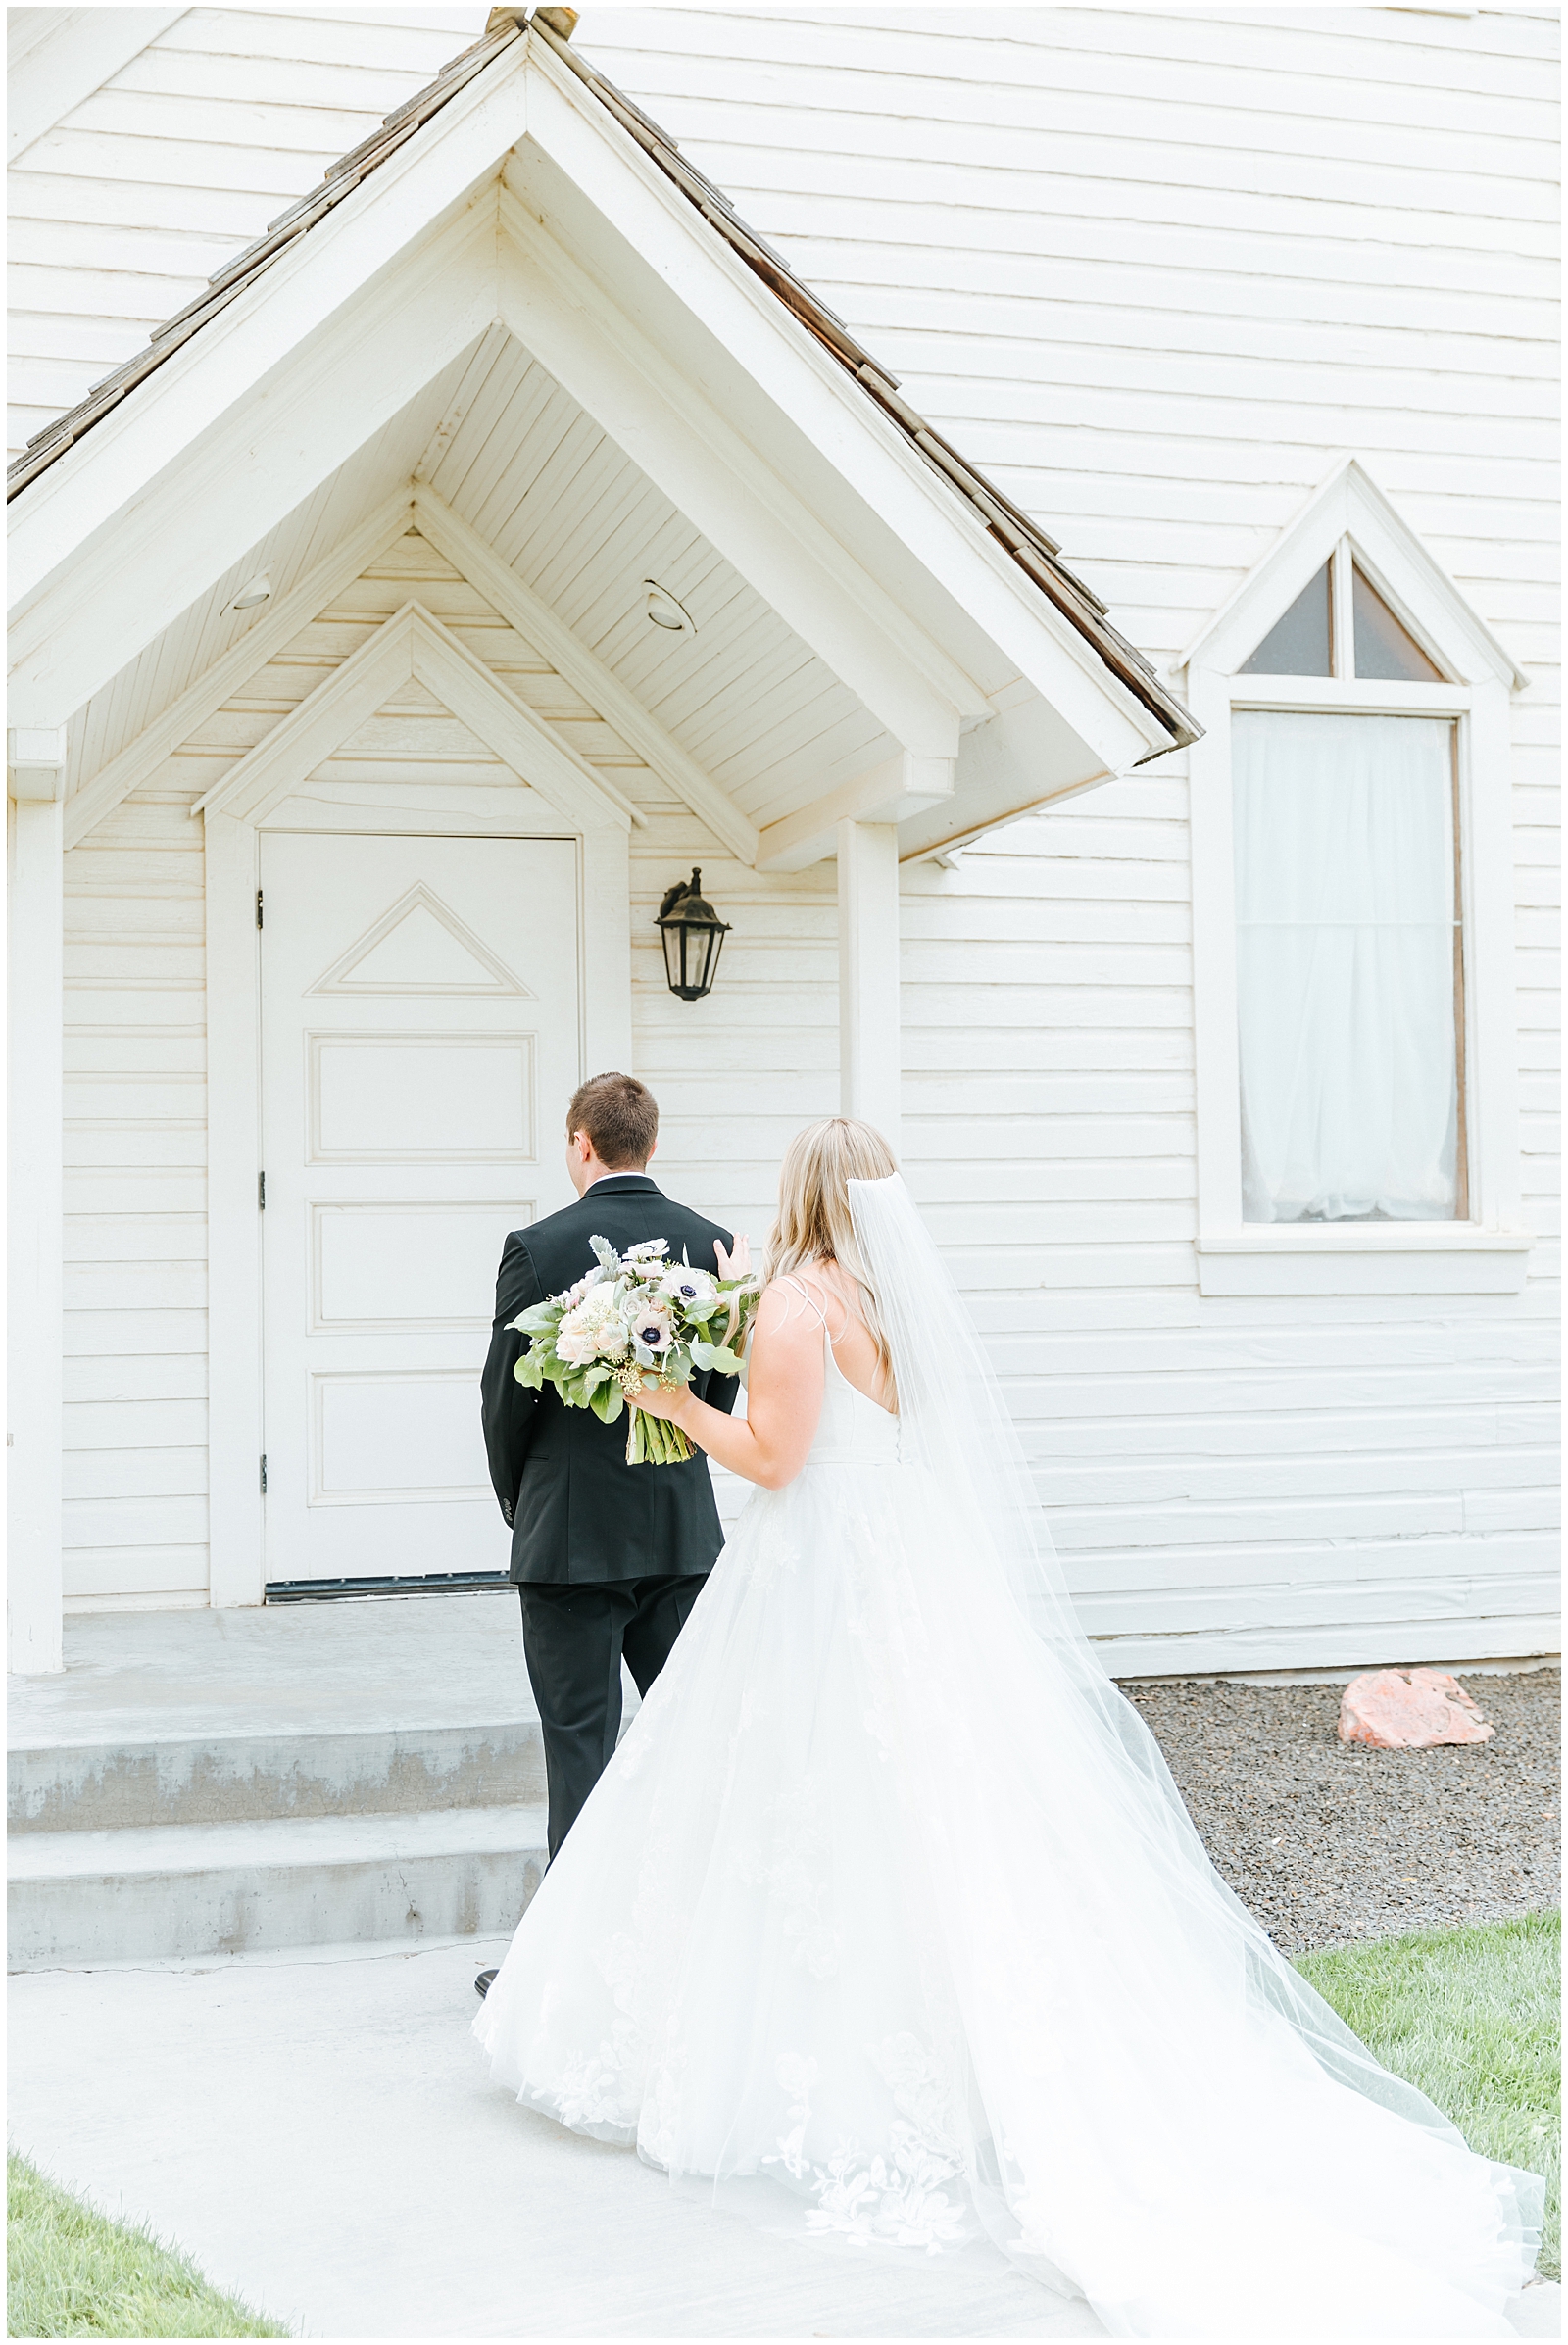 The Bride and Groom's First Look at August Still Water Hollow Wedding 